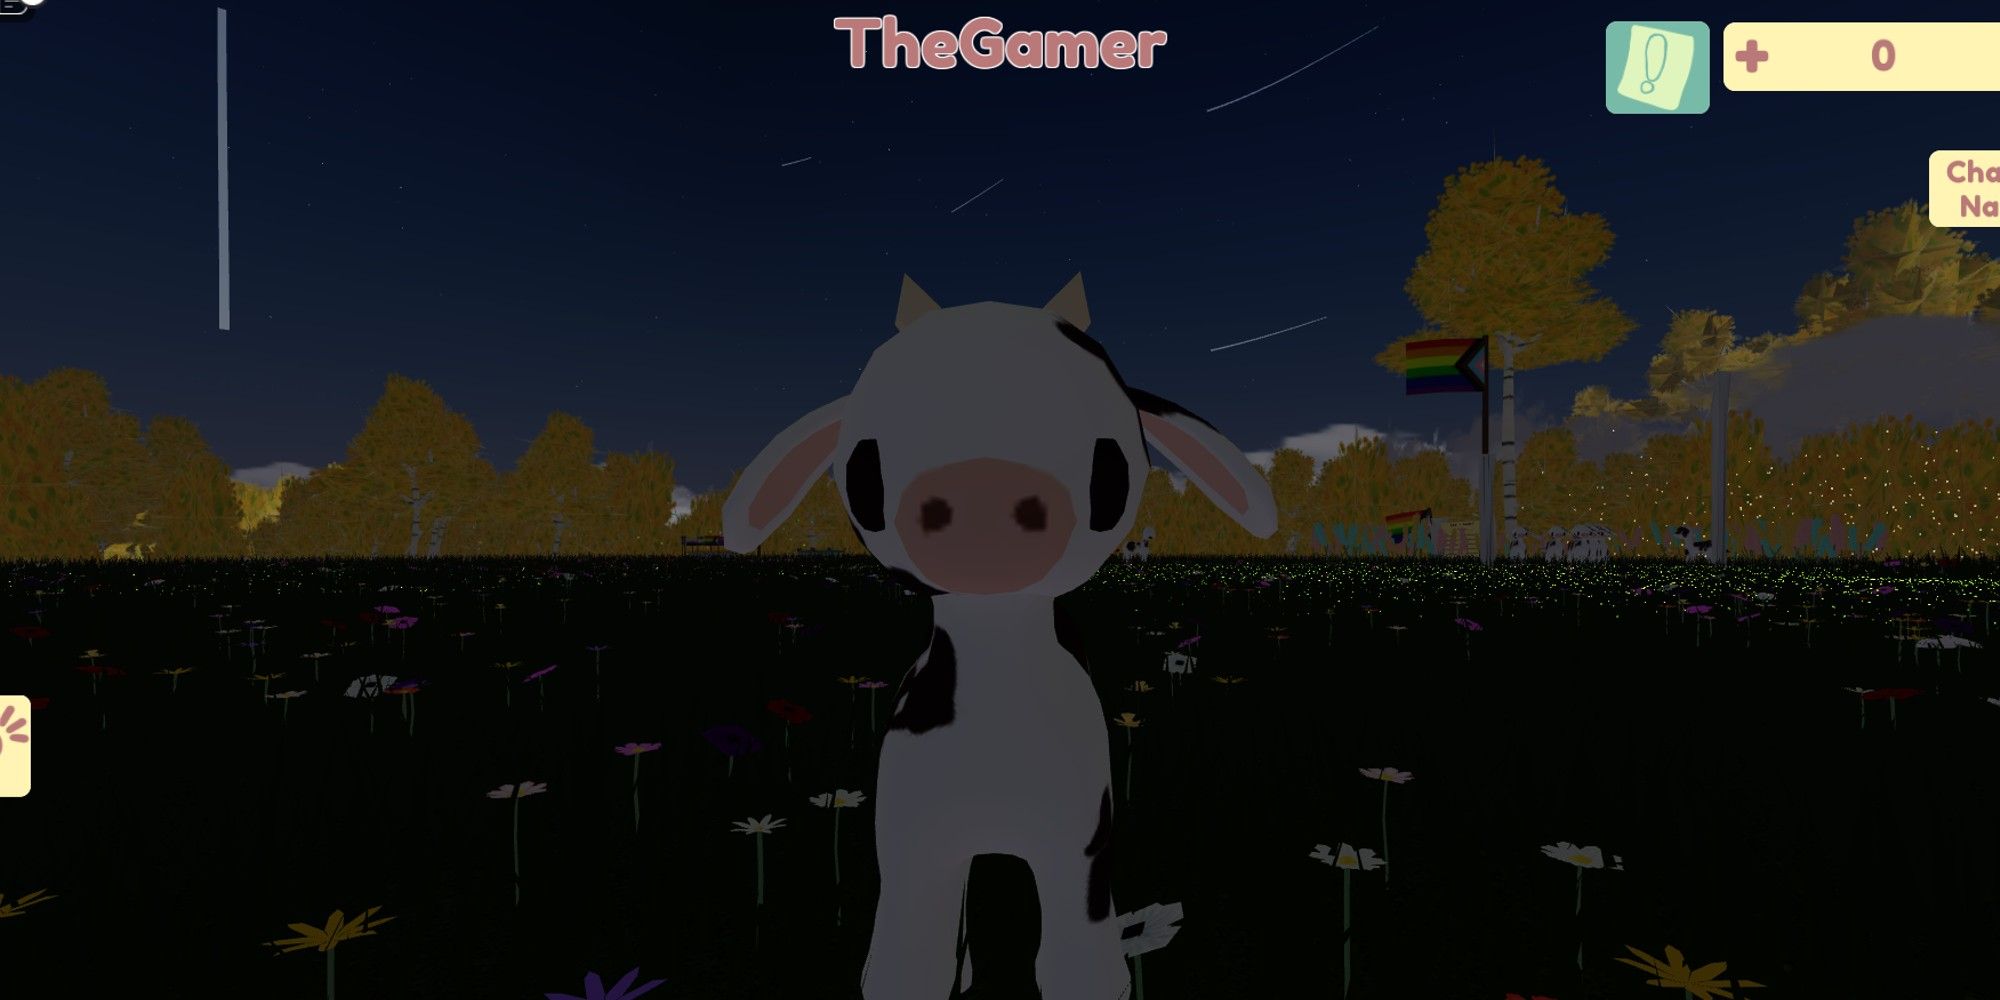 Moo Codes For October 2022 Roblox